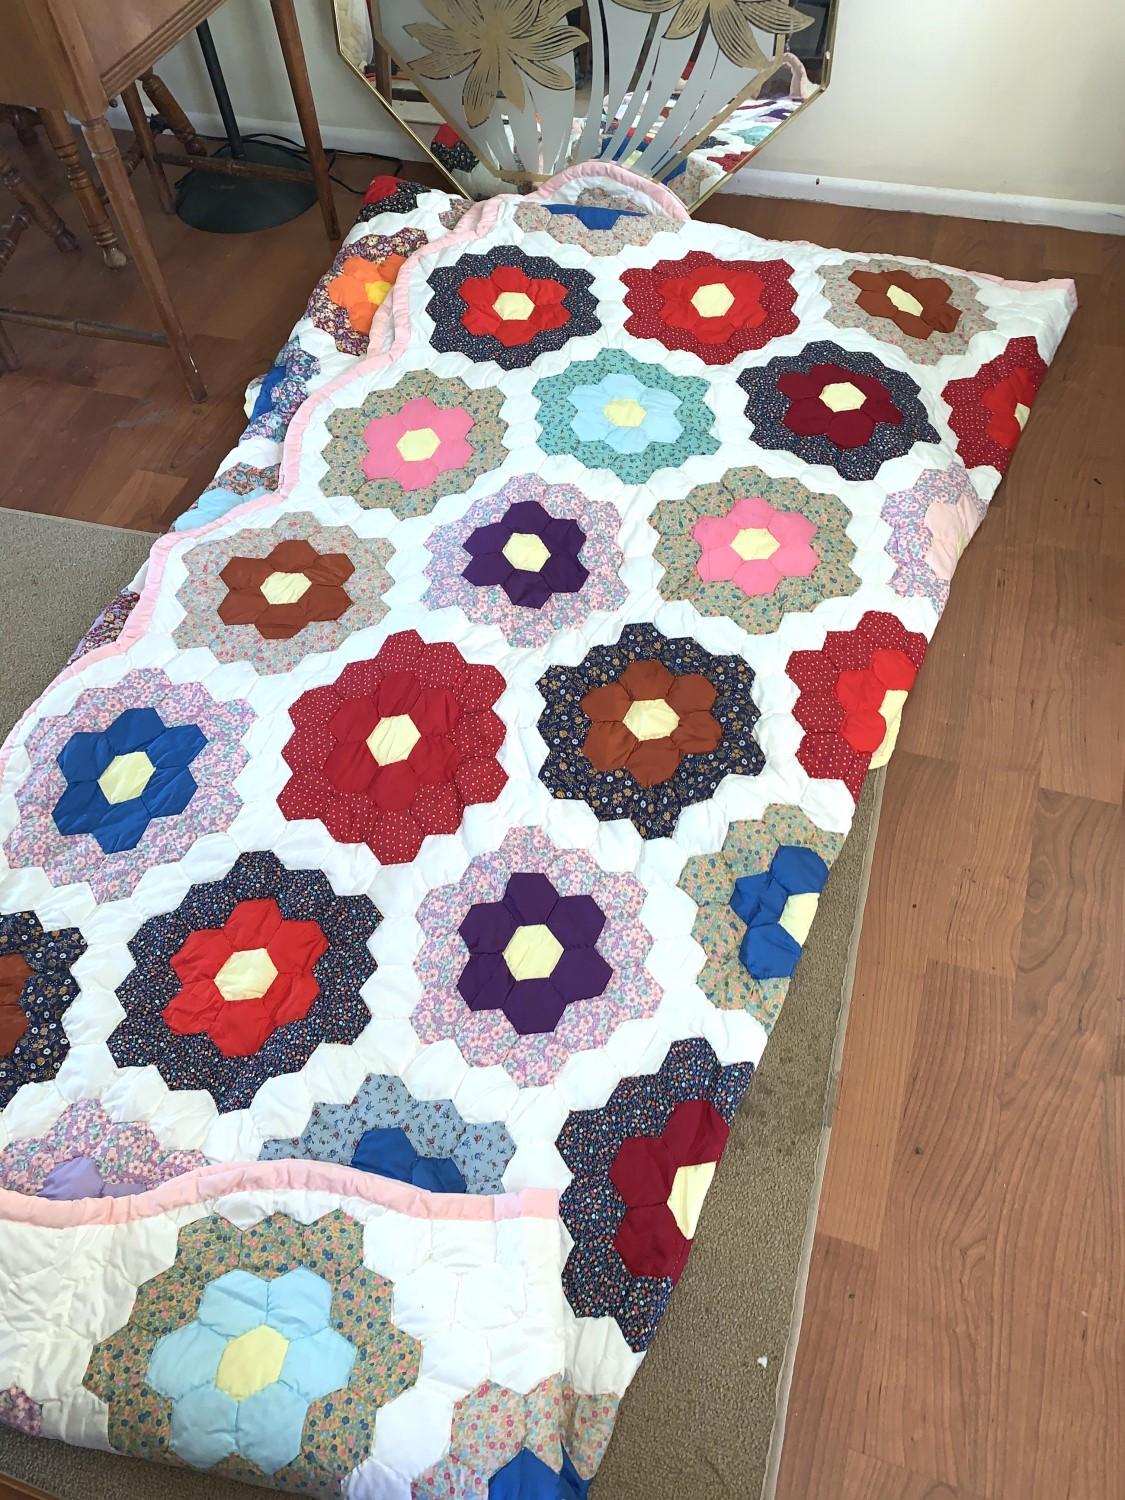 3 Beautiful Hand Stitched Quilts